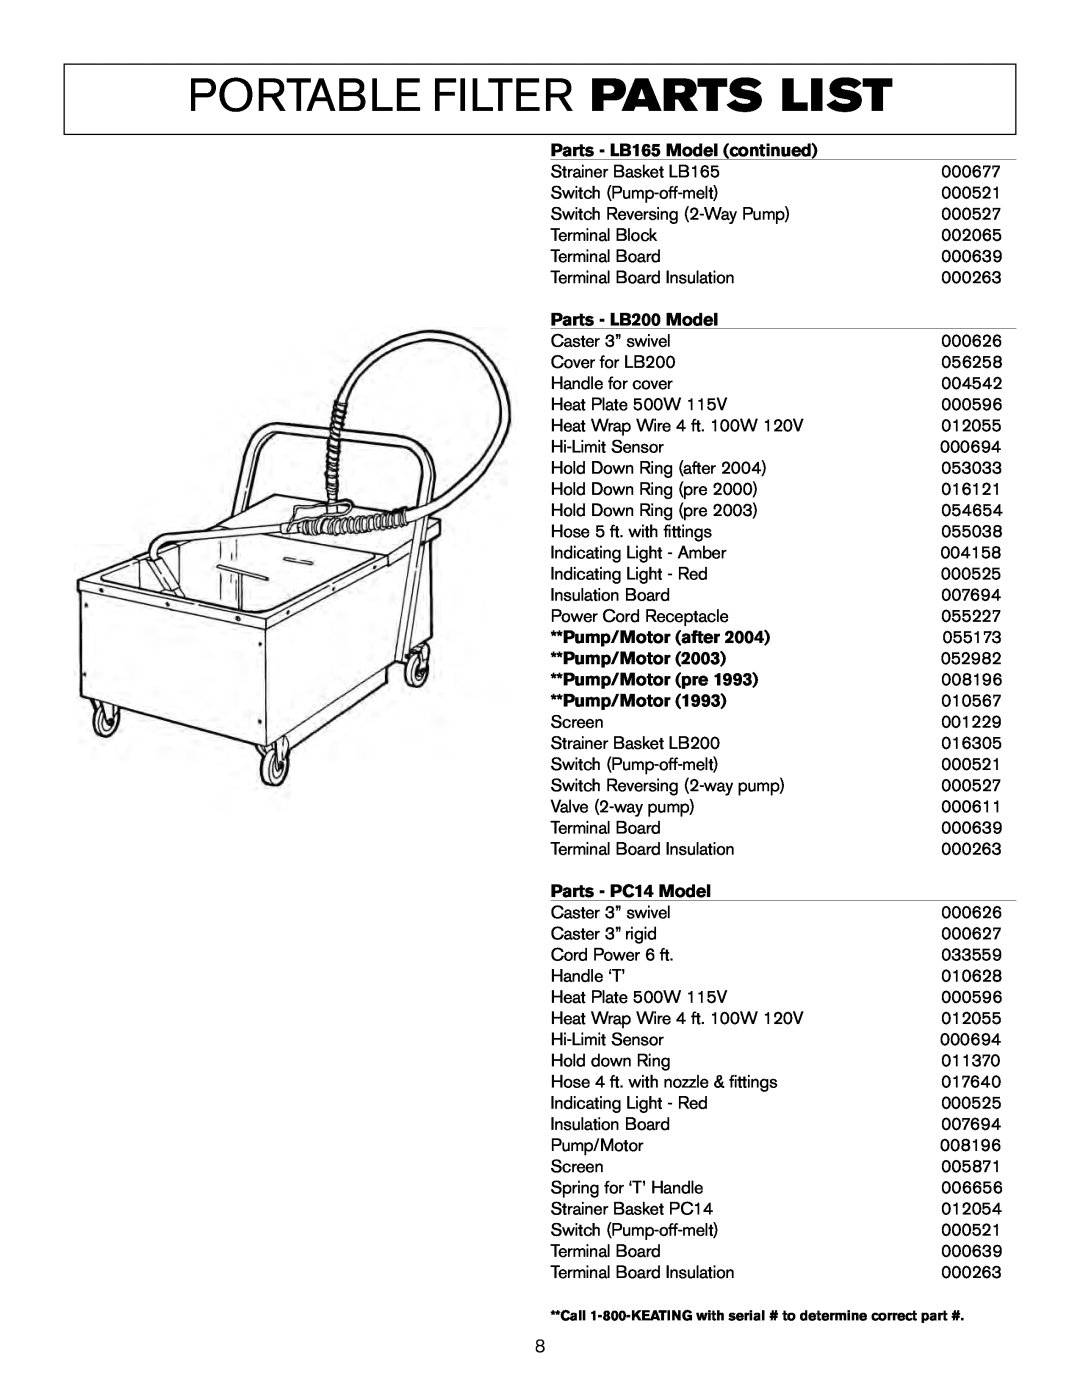 Keating Of Chicago LB-200 Portable Filter Parts List, Parts - LB165 Model continued, Parts - LB200 Model, Pump/Motor after 